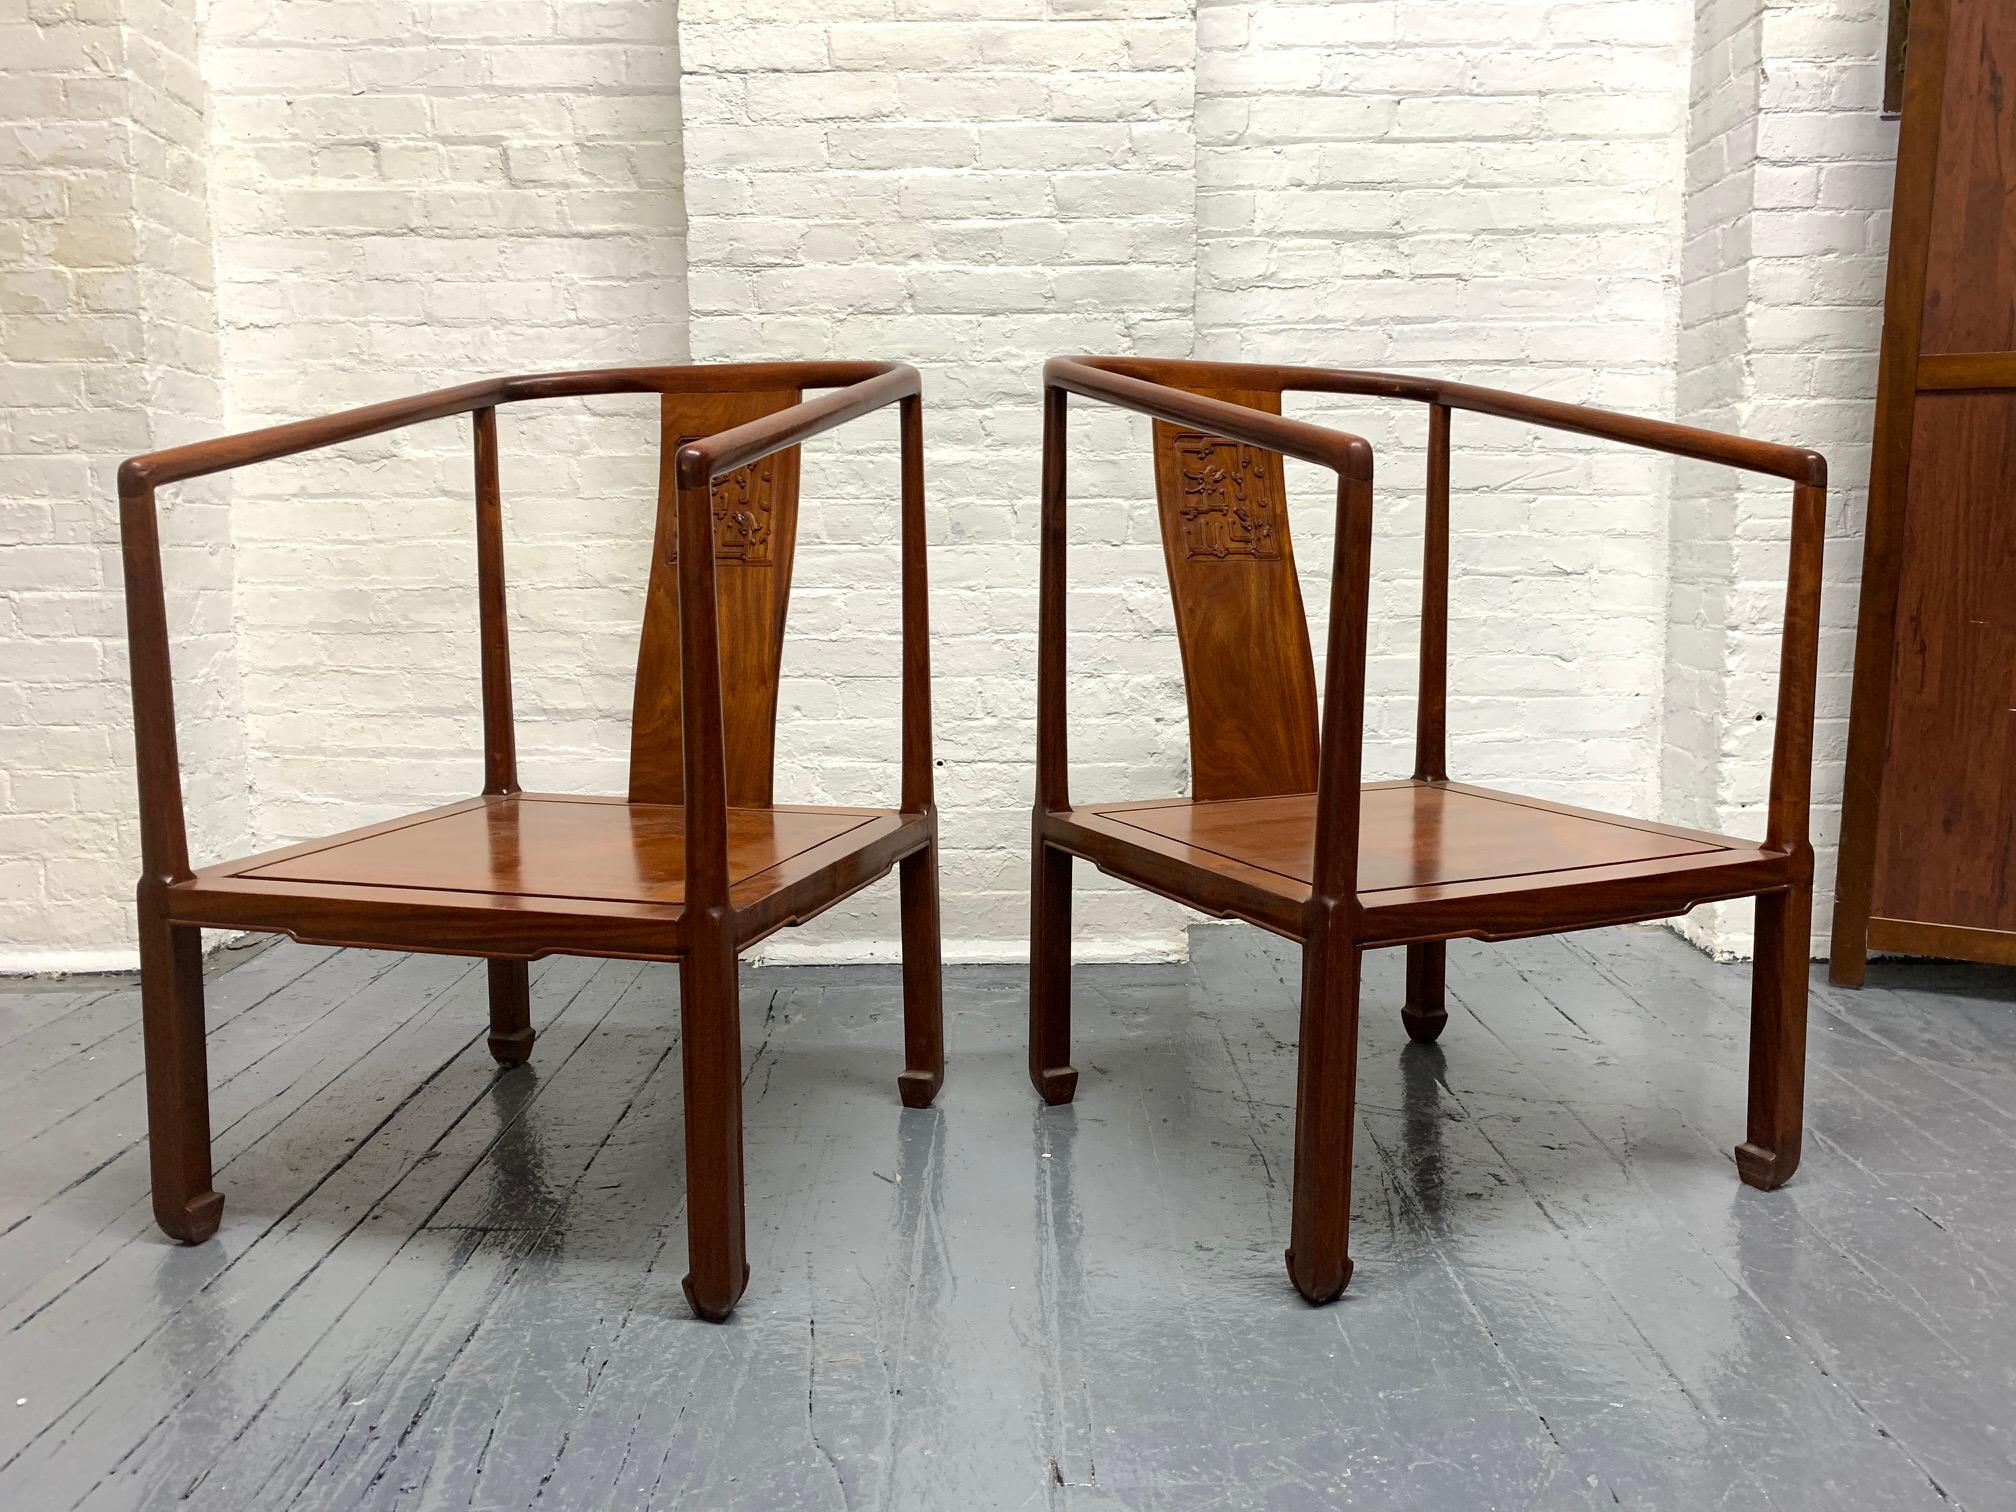 Pair of vintage Chinese rosewood chairs. Has a Chinese relief pattern to the back. Chairs are solid rosewood. Nice pair for an Asian inspired interior.